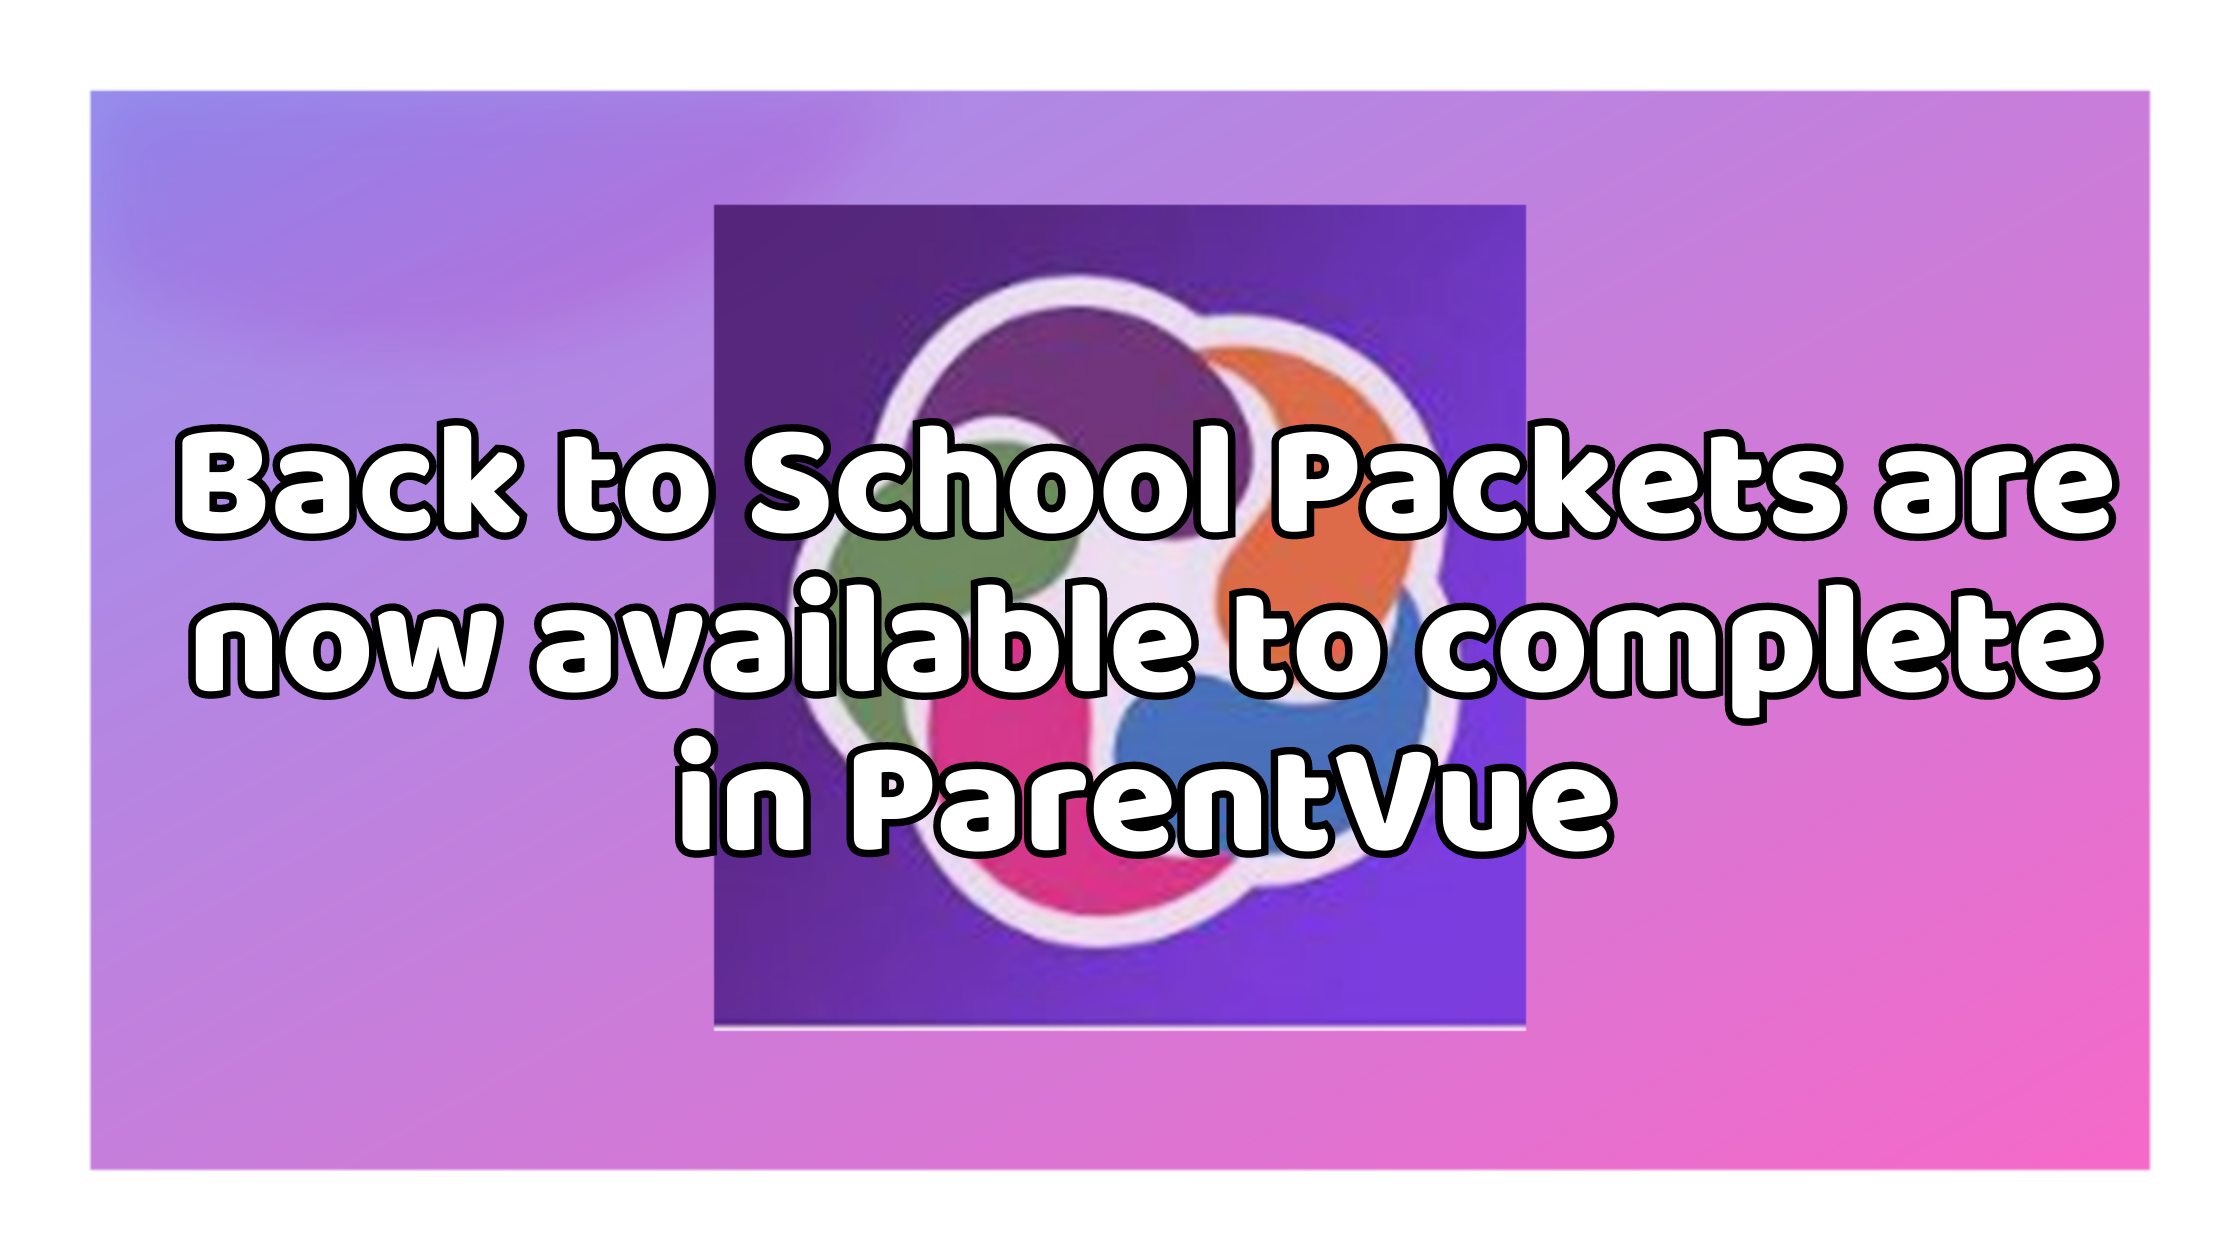 The Back to School Packet is now available to complete in ParentVUE